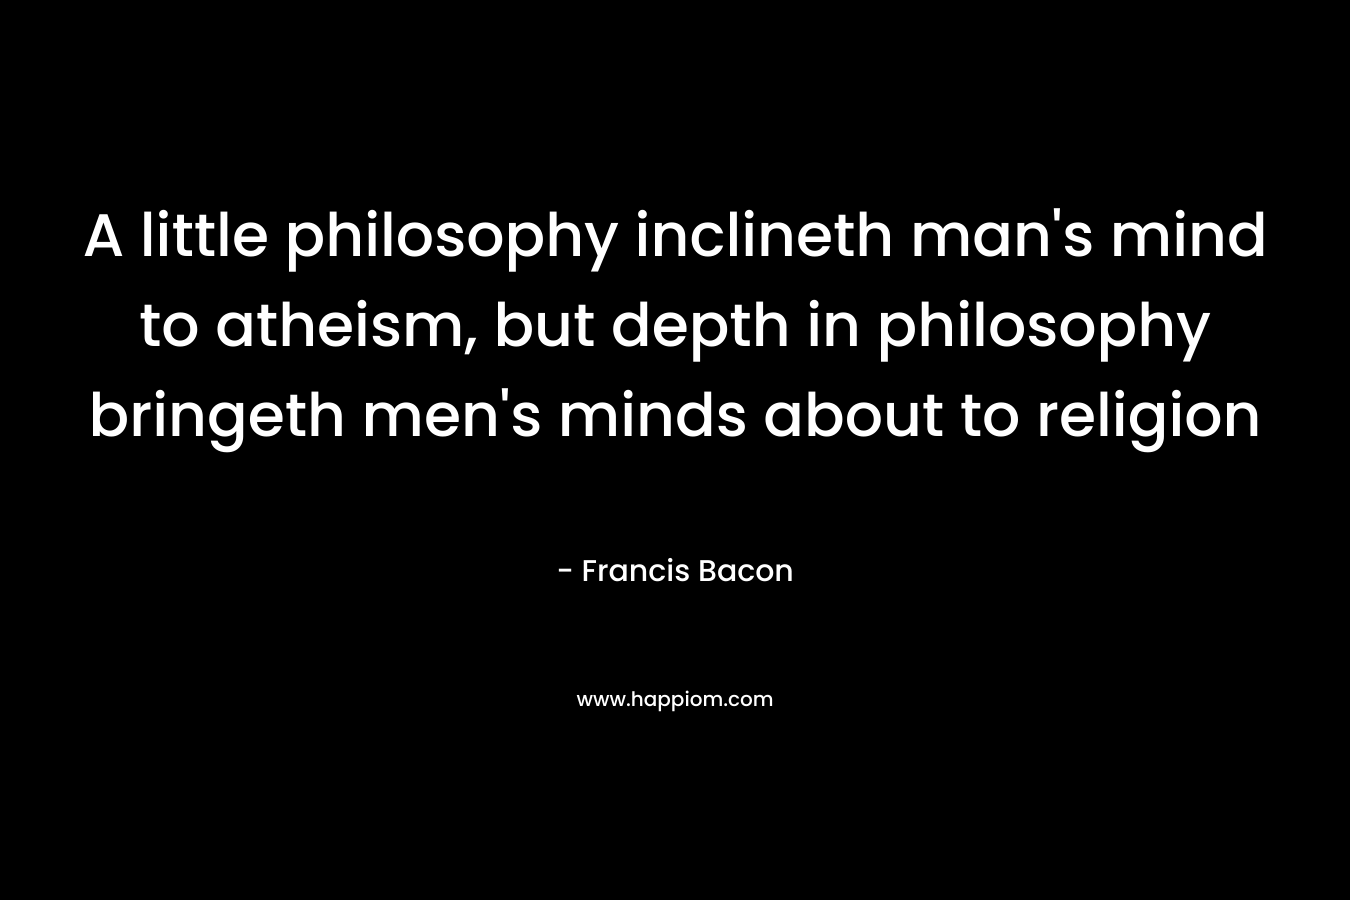 A little philosophy inclineth man's mind to atheism, but depth in philosophy bringeth men's minds about to religion